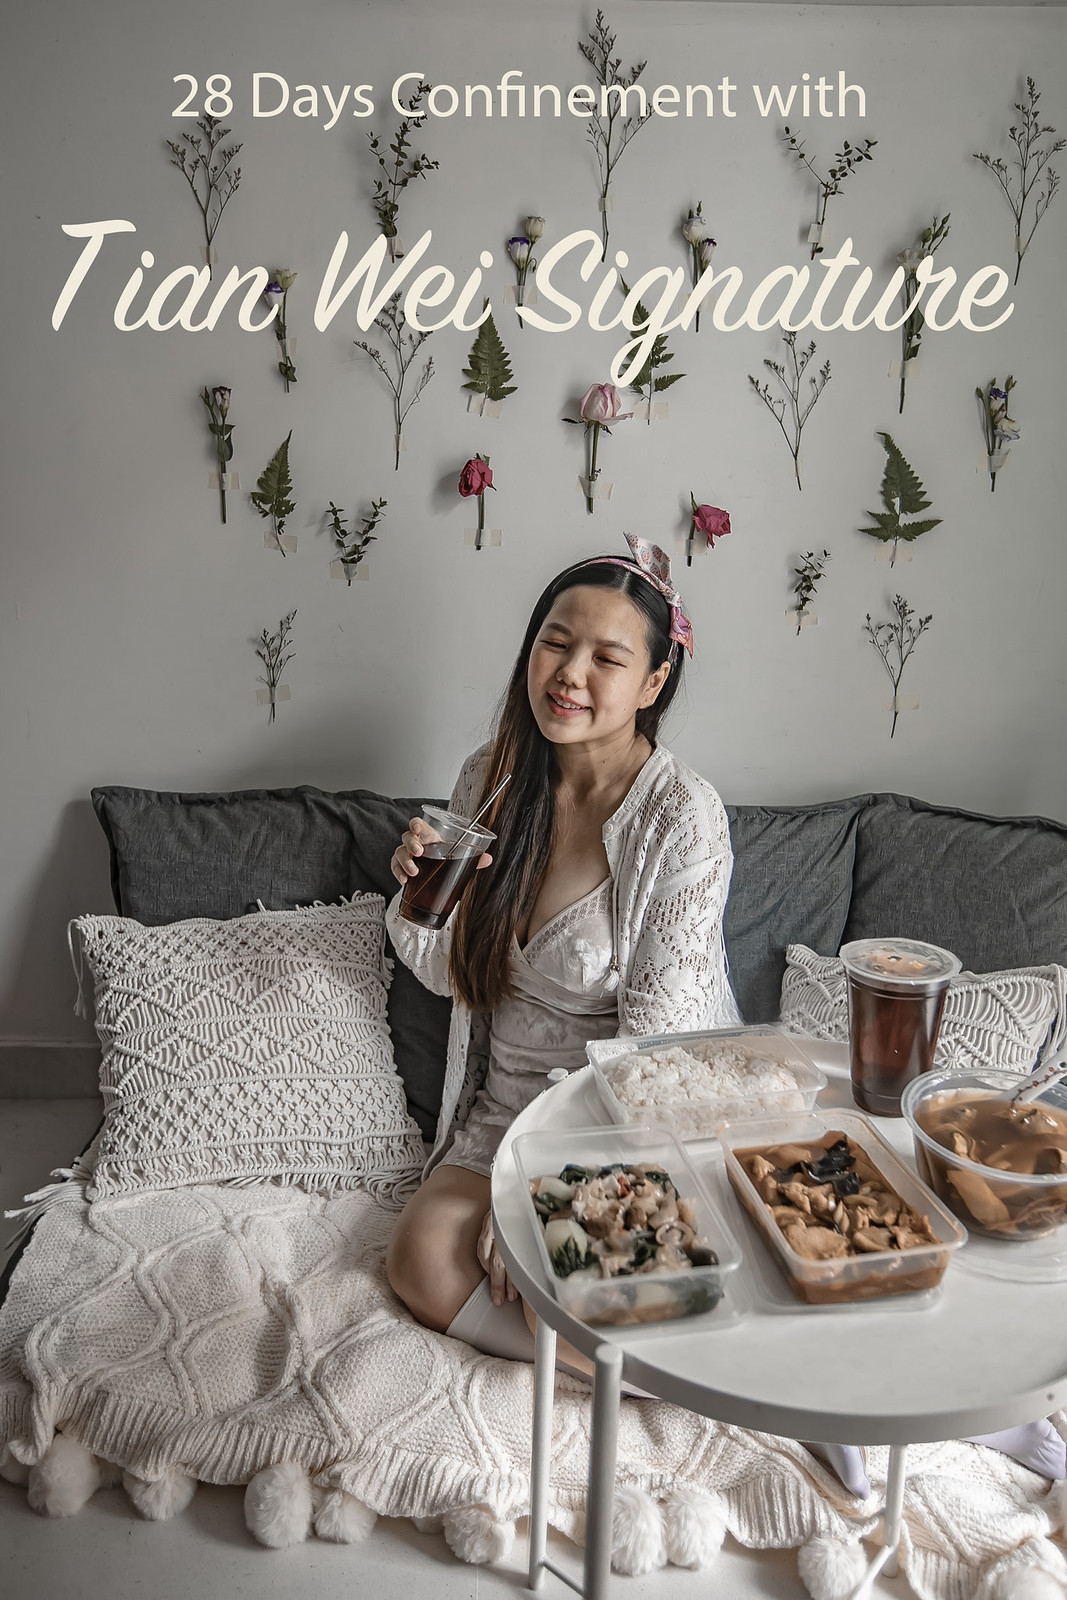 28 Days Tian Wei Signature Confinement Food Singapore Review